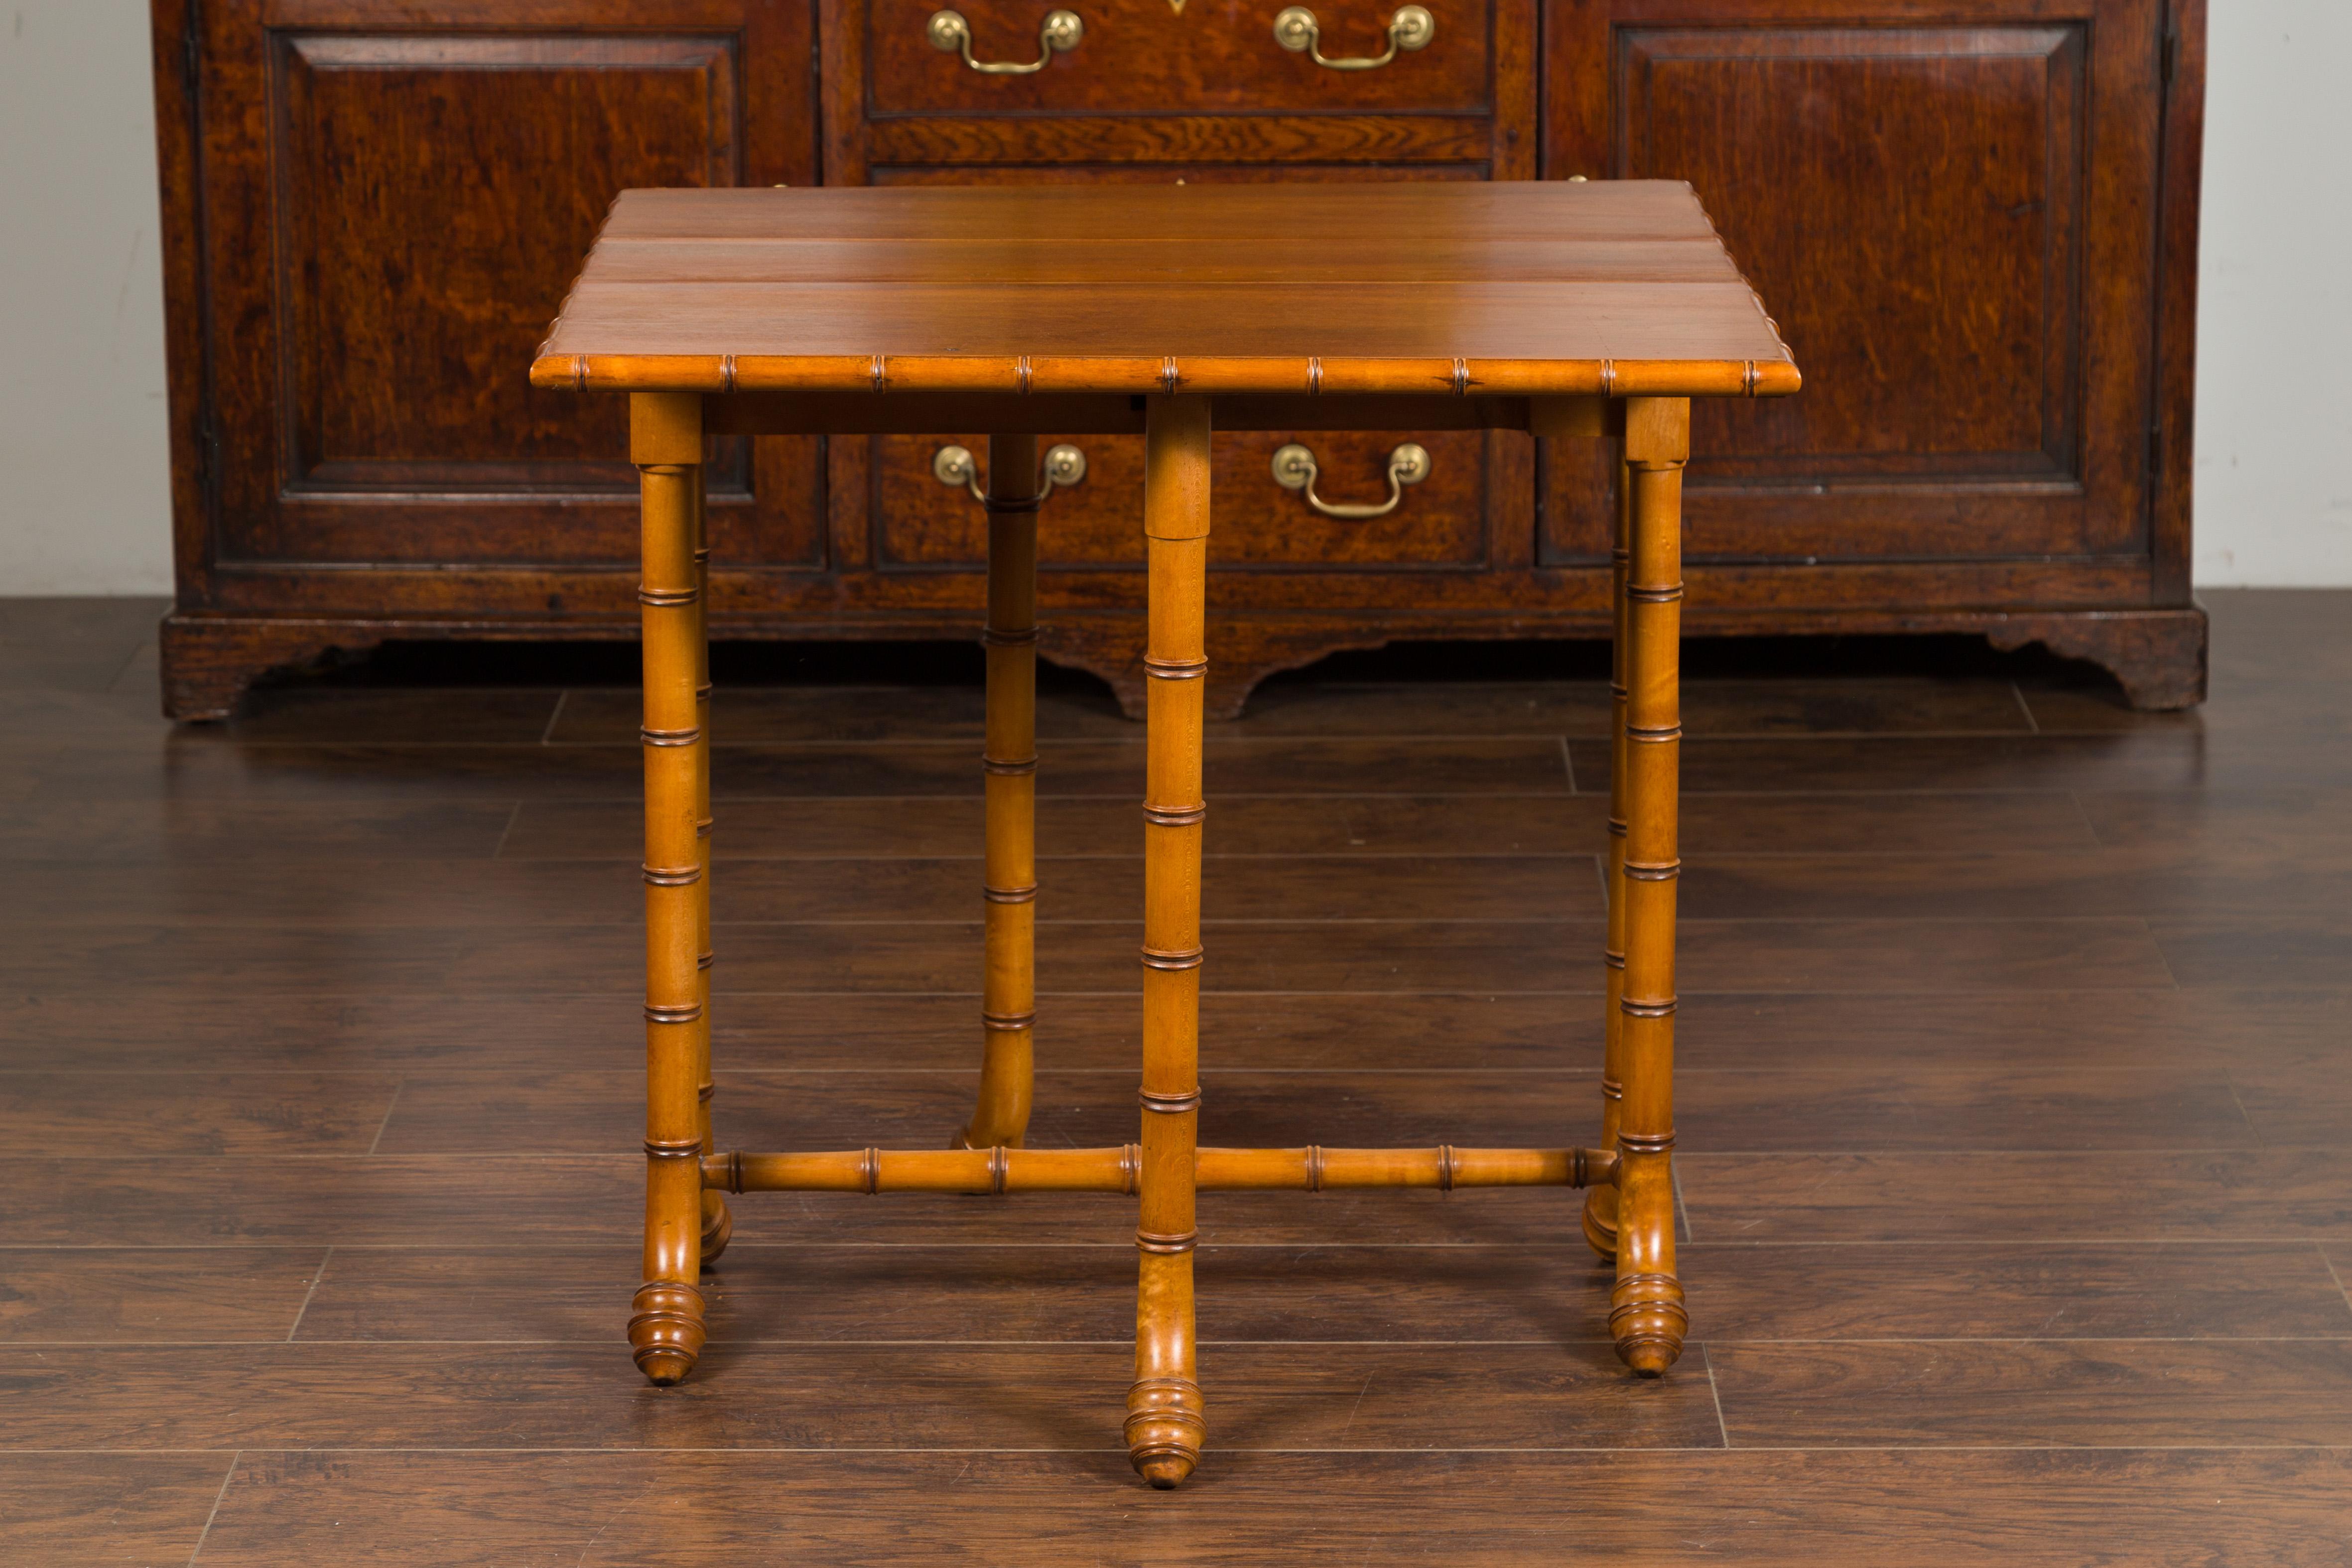 20th Century English Walnut Drop-Leaf Table with Faux-Bamboo Base, circa 1900 For Sale